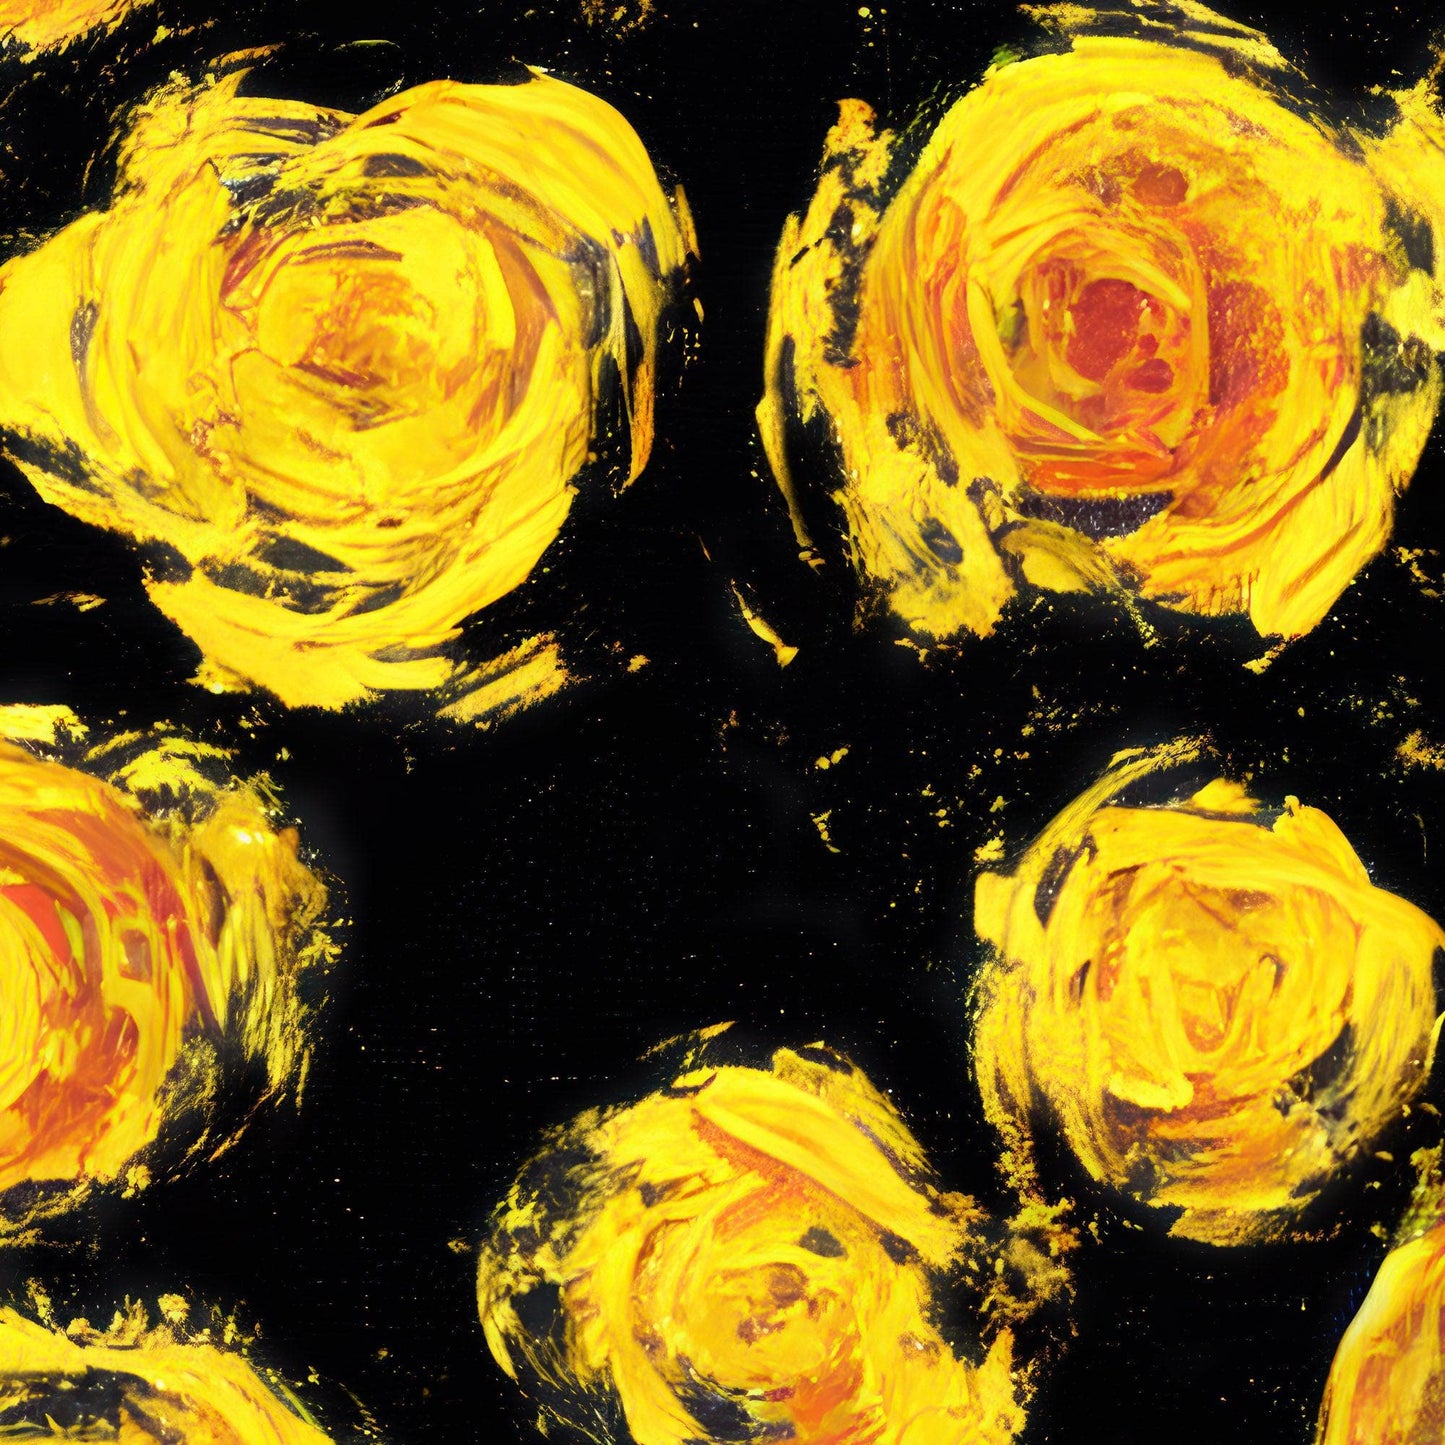 Flower Wallpaper Peel and Stick Wall Mural. Yellow Flowers on Black Background. #6499